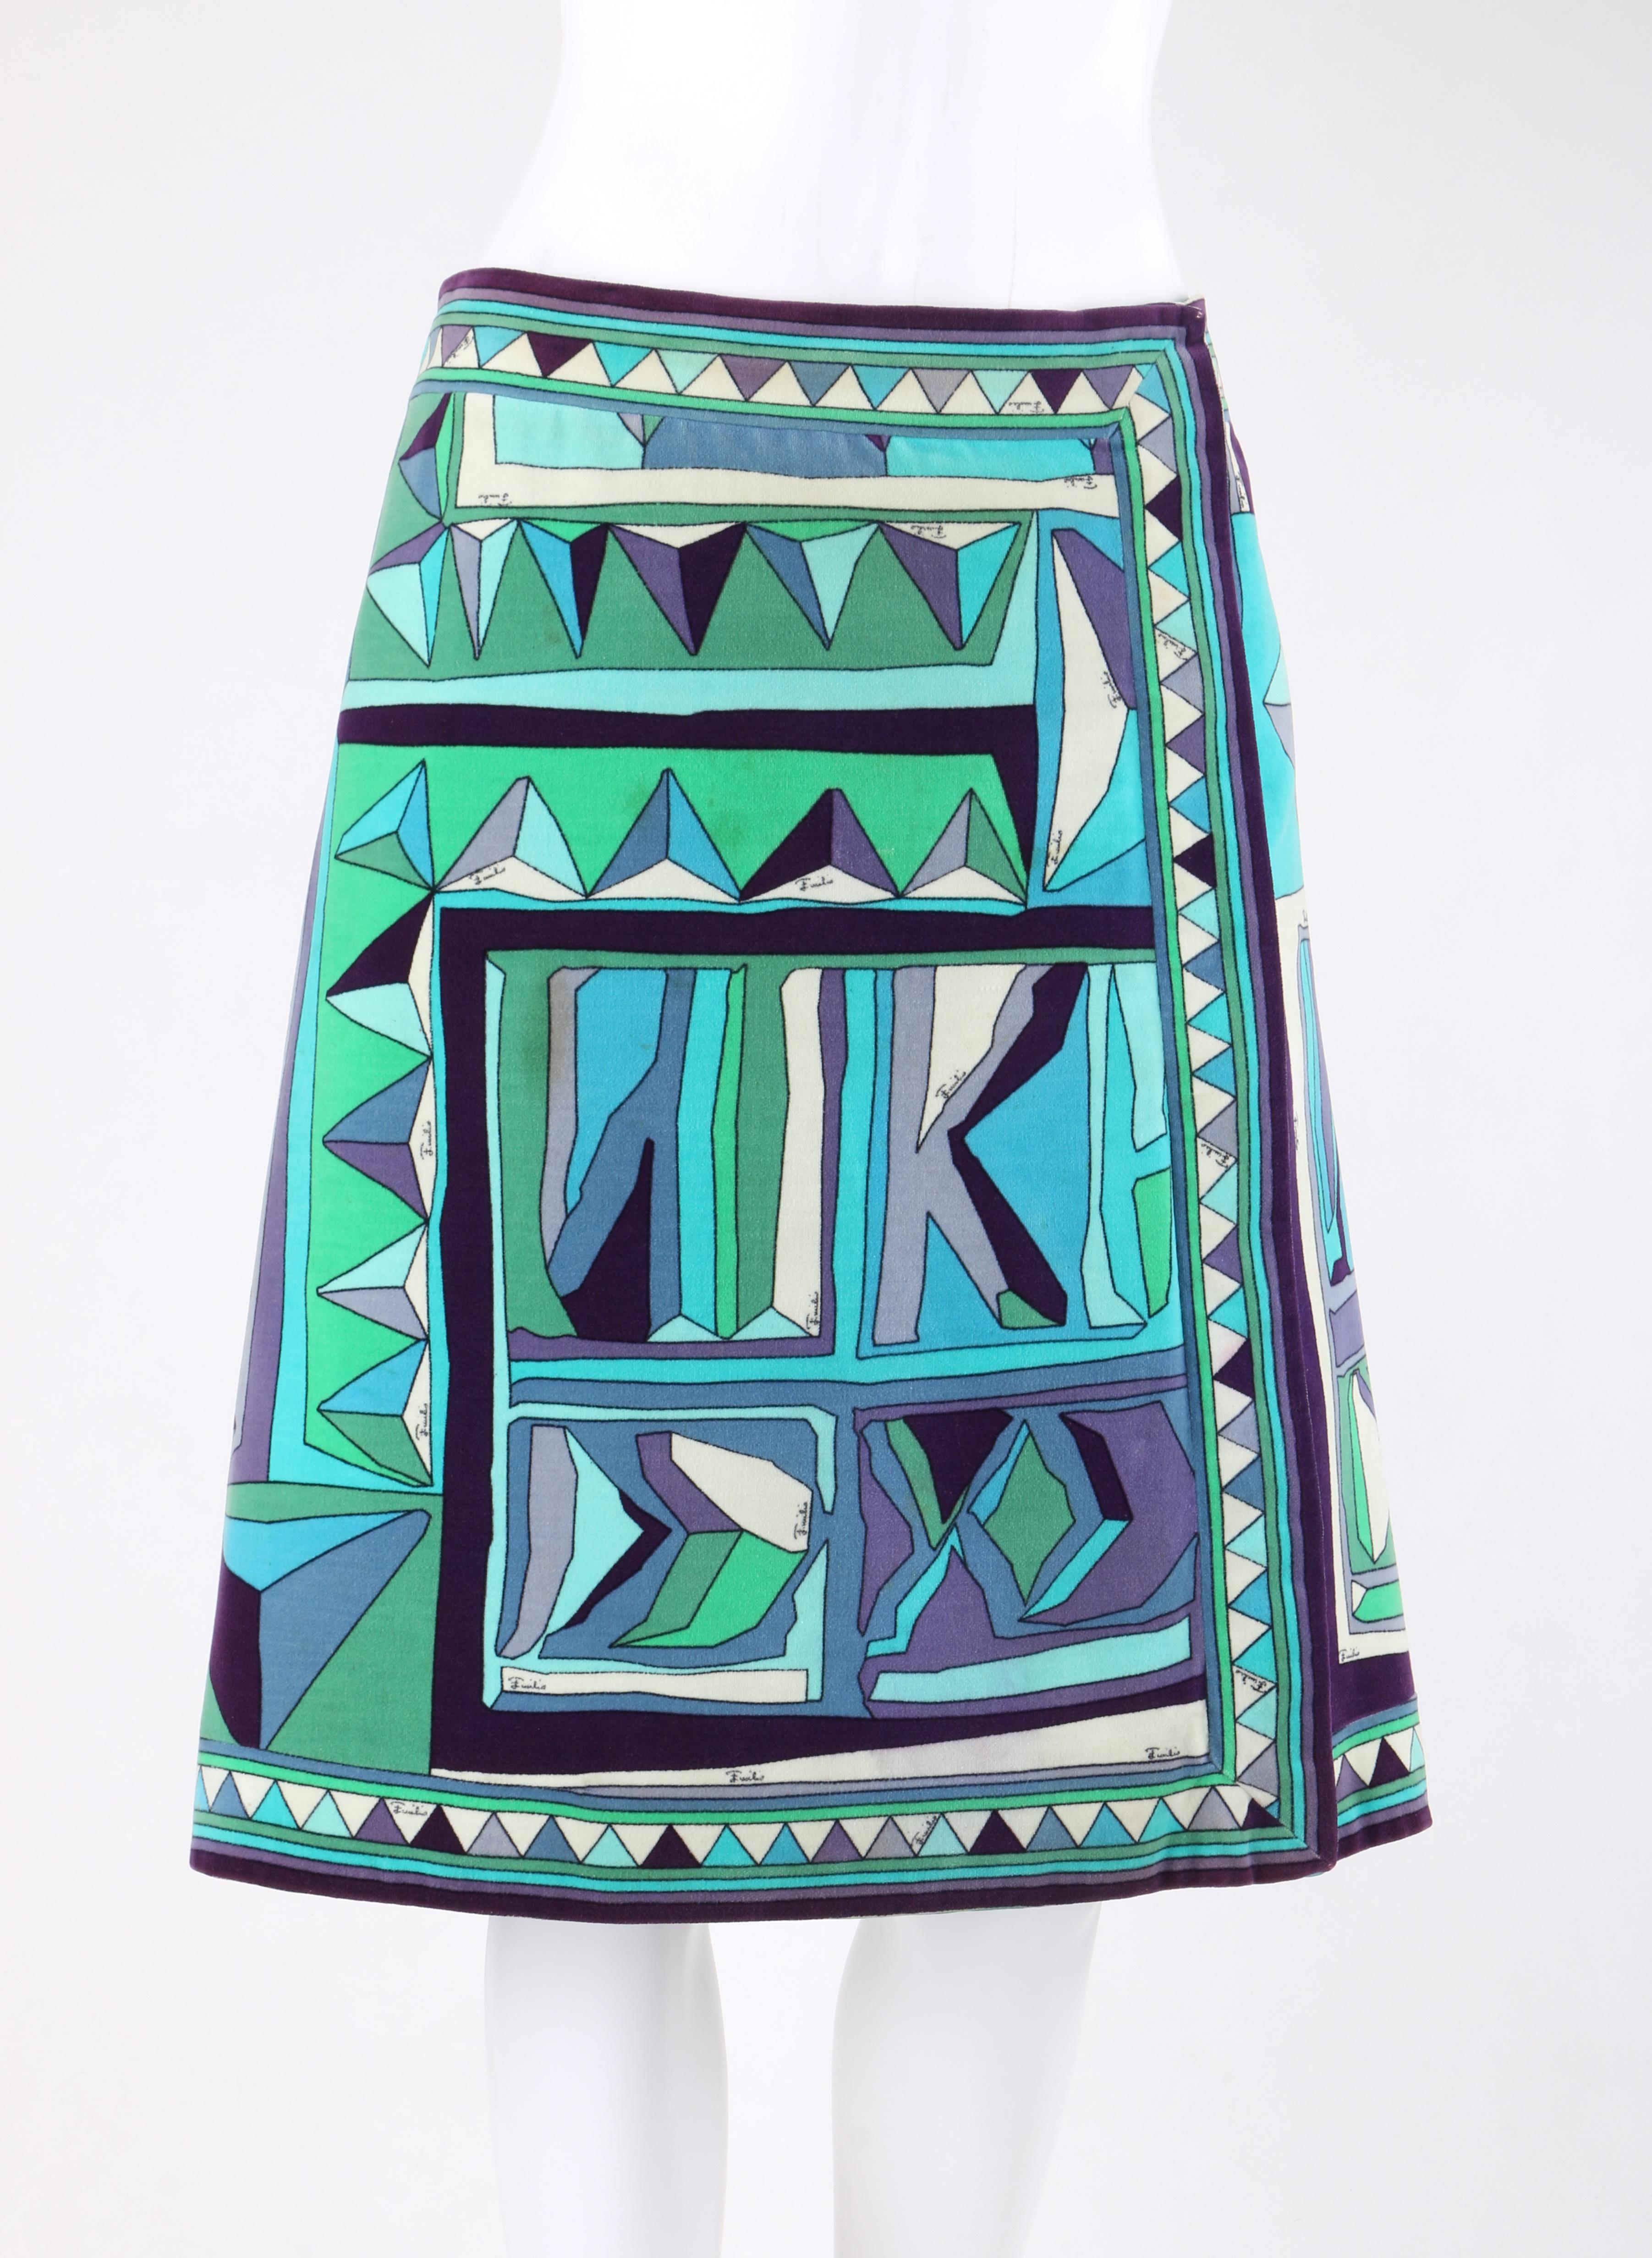 EMILIO PUCCI c.1960's Blue Multicolor Signature Print Velvet A-Line Wrap Skirt
 
Circa: c.1960’s
Label(s): Emilio Pucci Exclusively for Saks Fifth Avenue
Style: Wrap skirt
Color(s): Shades of blue, green, purple, and white
Lined: Yes
Marked Fabric